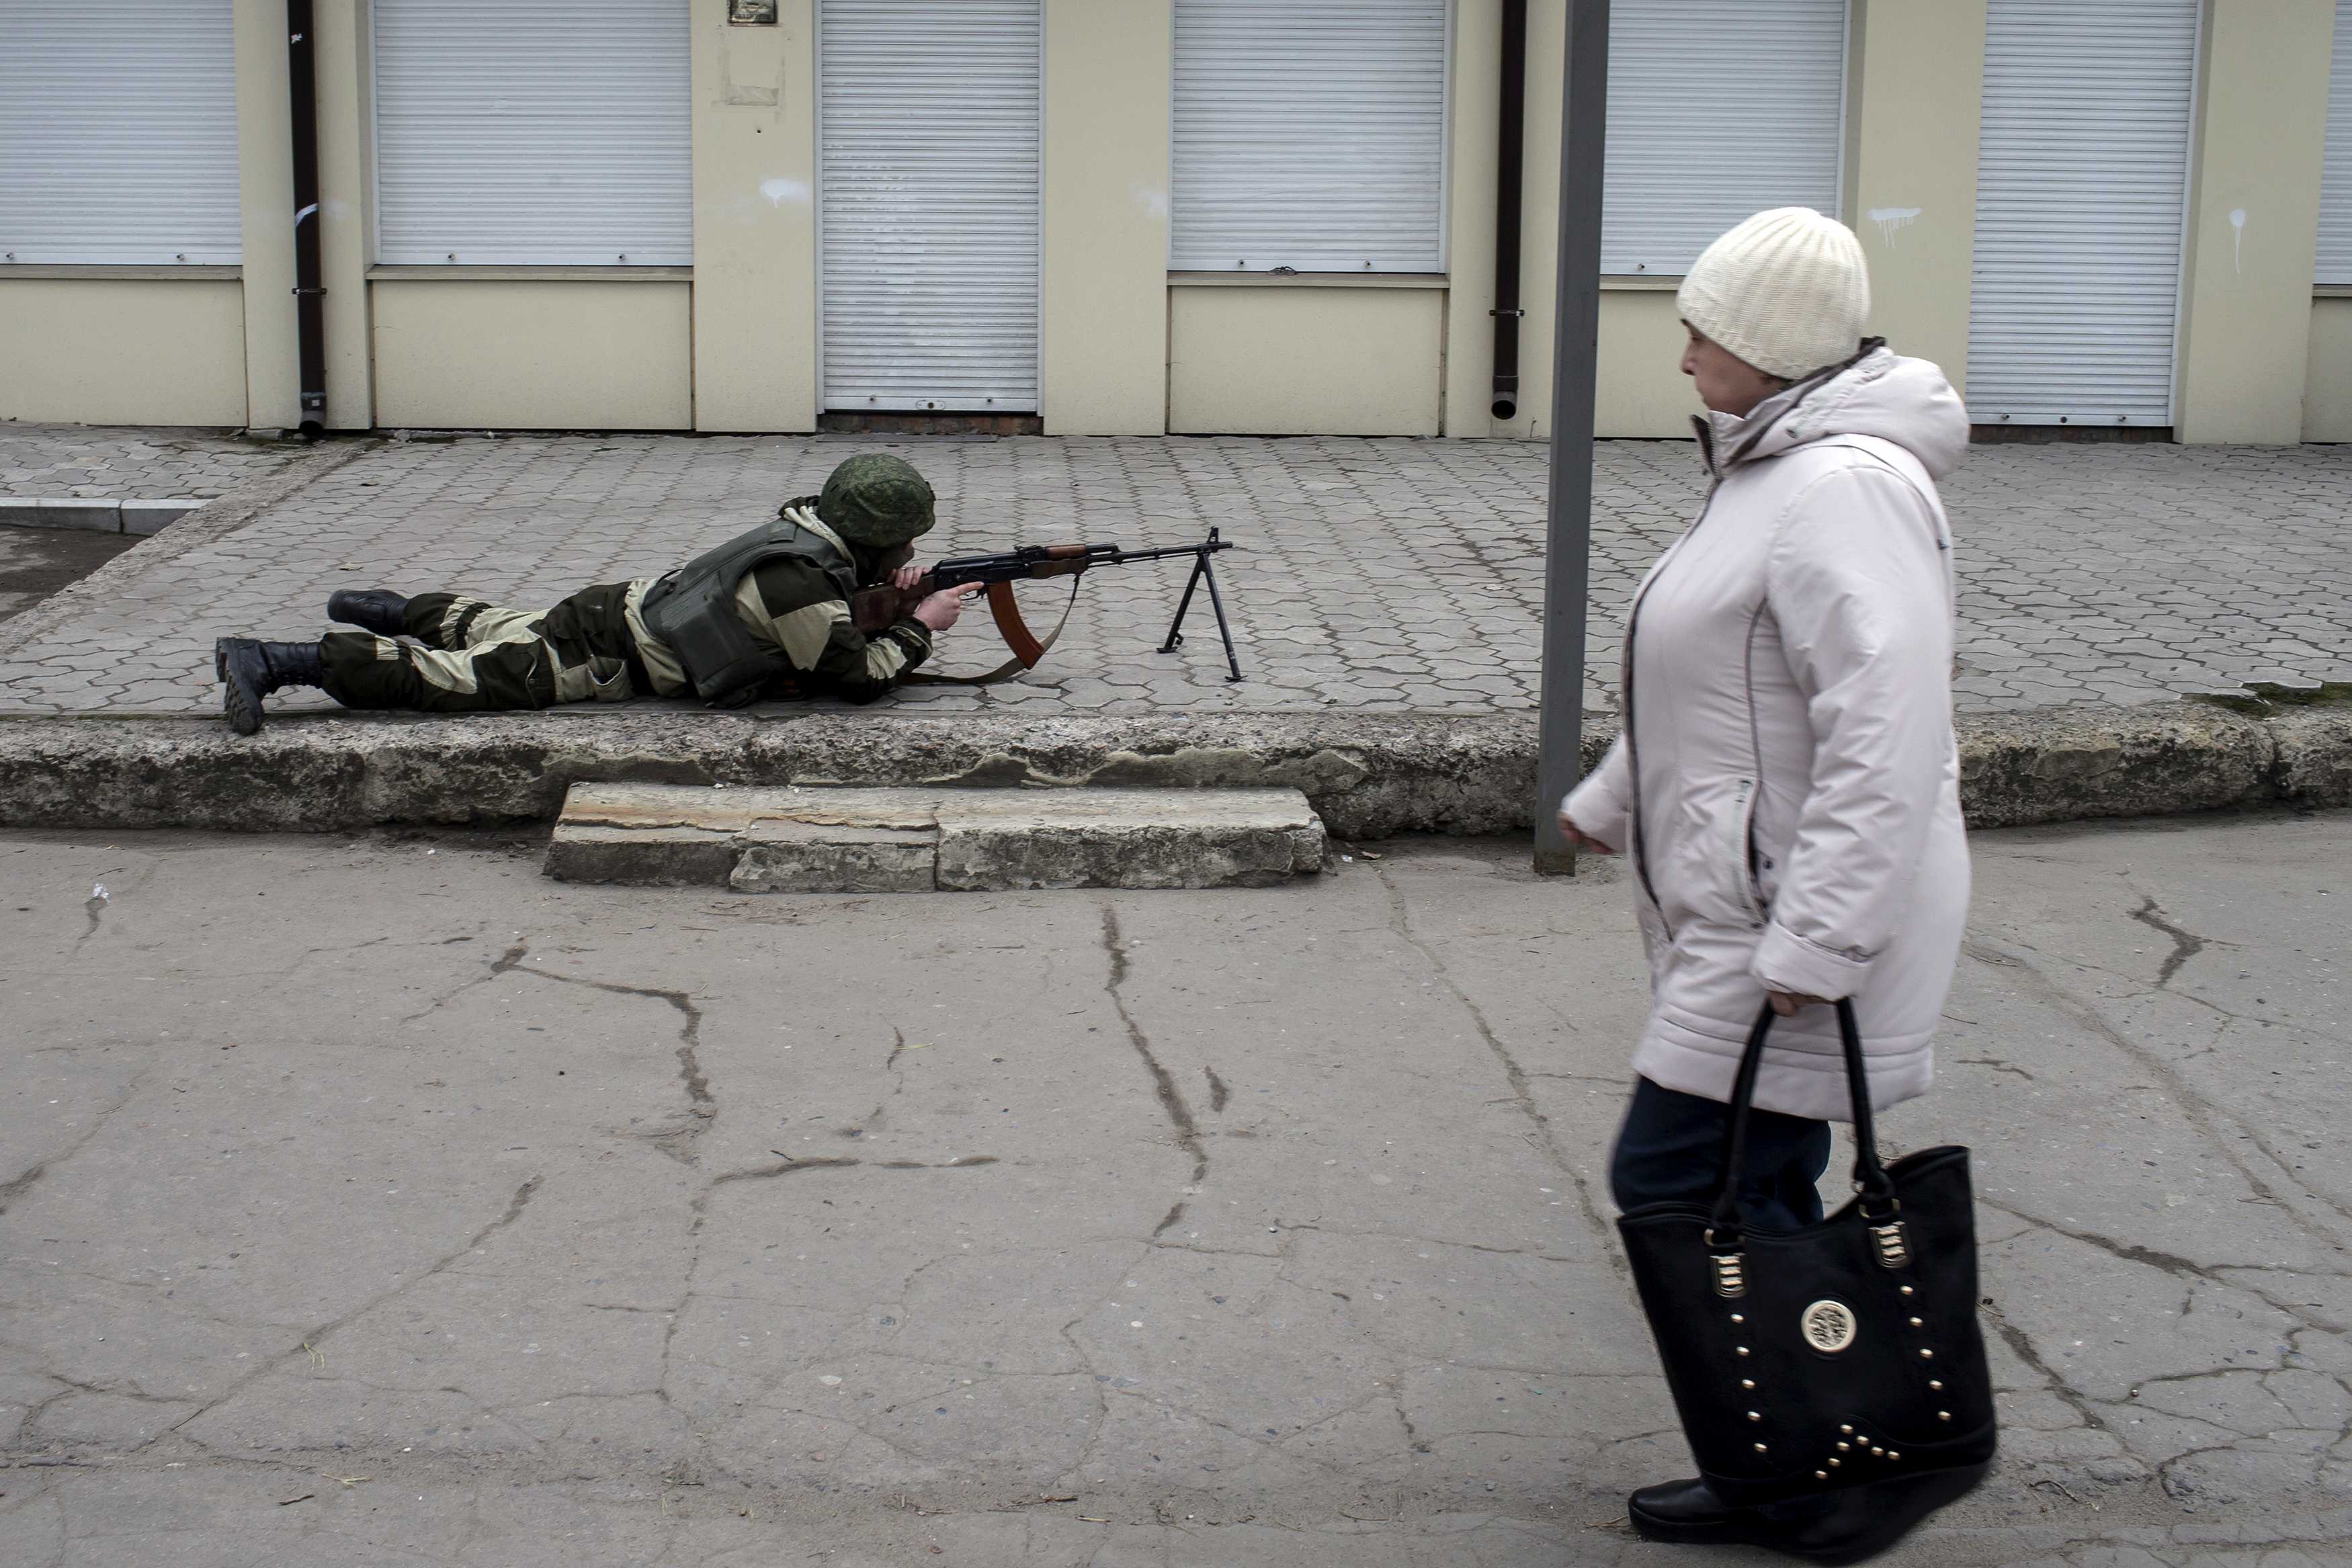 A pro-Russian rebel aims his weapon as a woman passes by during what the rebels said was an anti-terrorist drill in Donetsk, Ukraine, Wednesday. Rebel-held areas of east Ukraine are suffering deteriorating water supplies amid the continued strife. | REUTERS